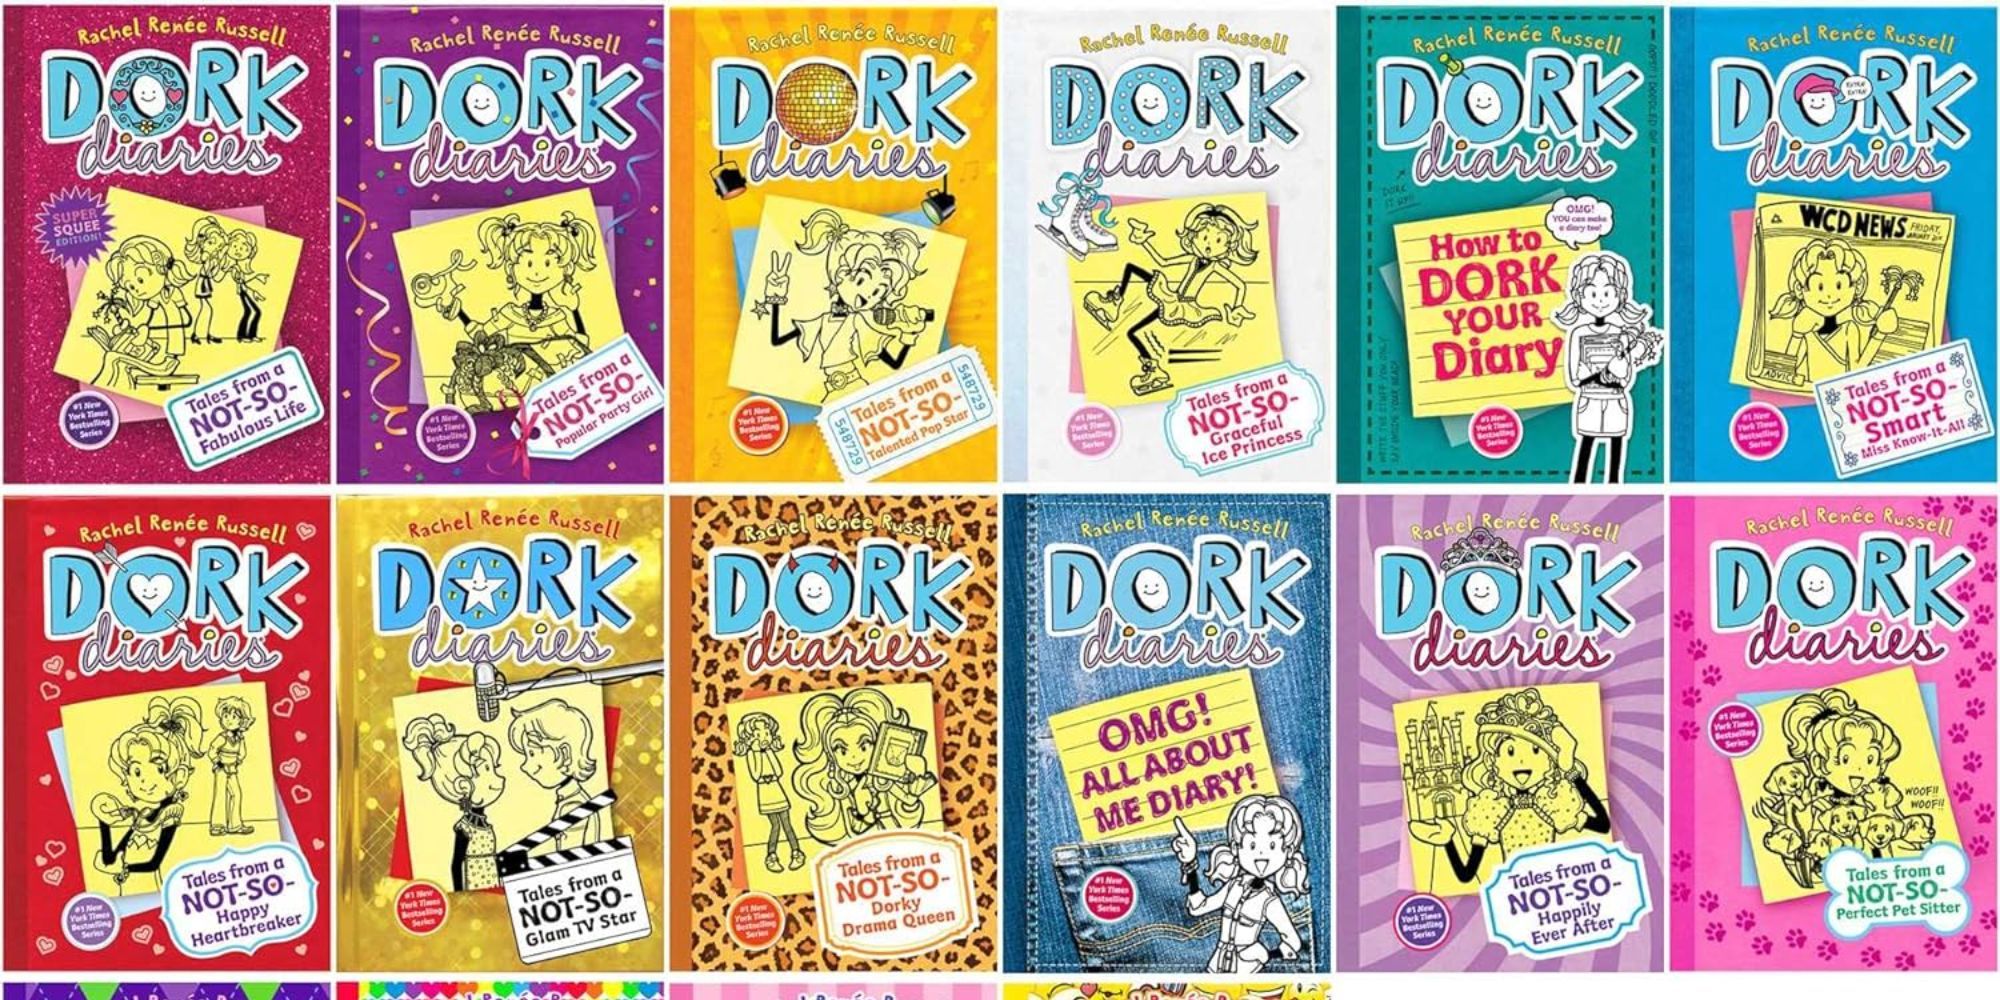 The Dork Diaries books are lined up. 